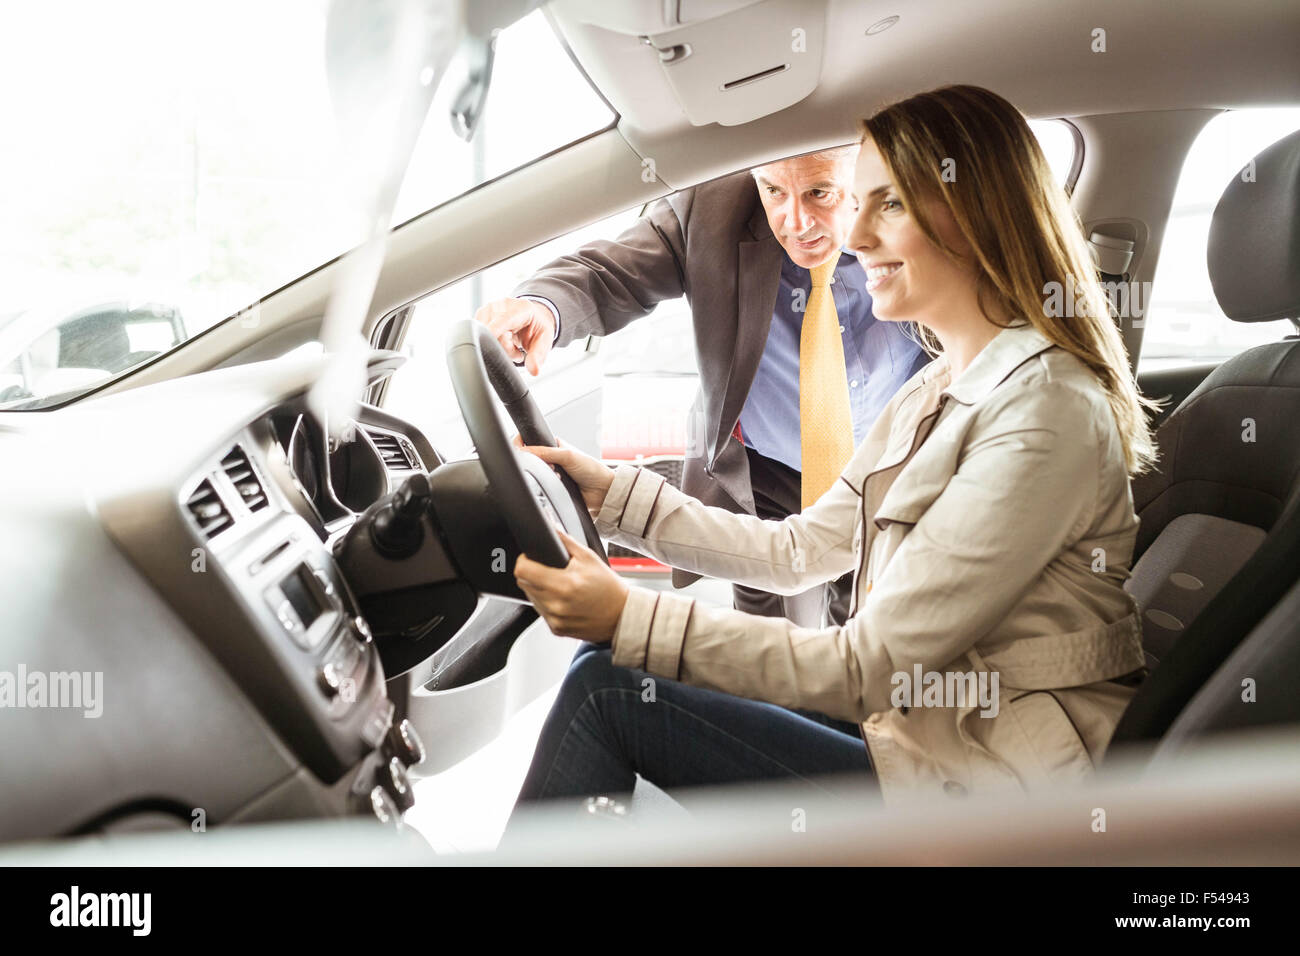 Salesman showing somethings to a customer Stock Photo